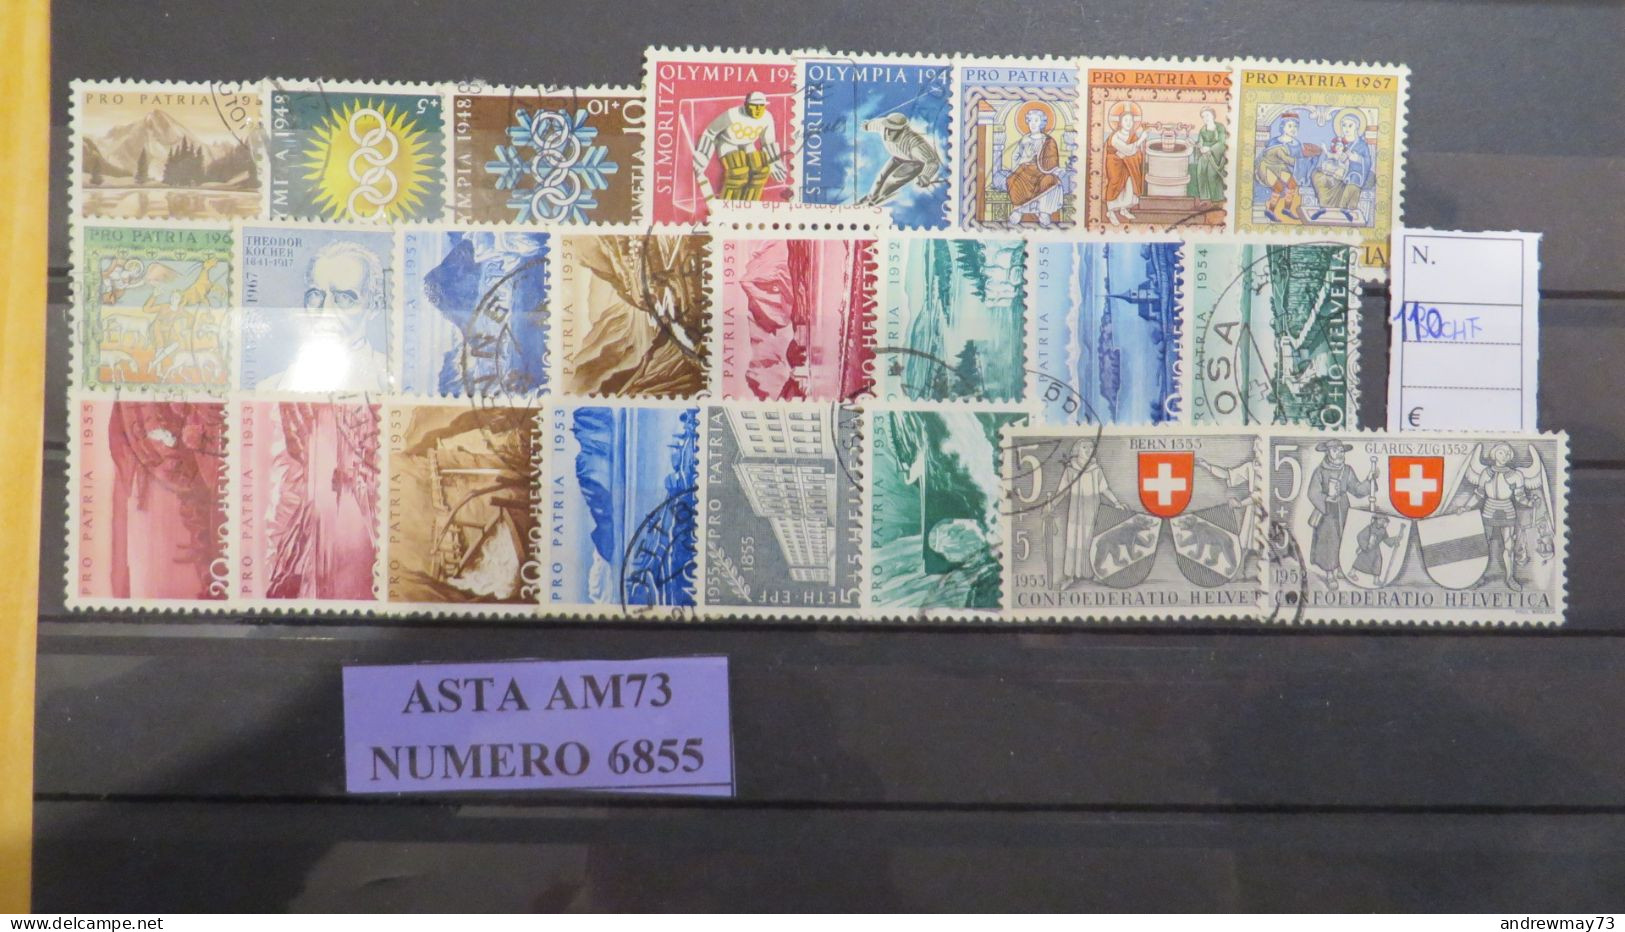 SWITZERLAND- NICE USED SELECTION- BARGAIN PRICE - Collections